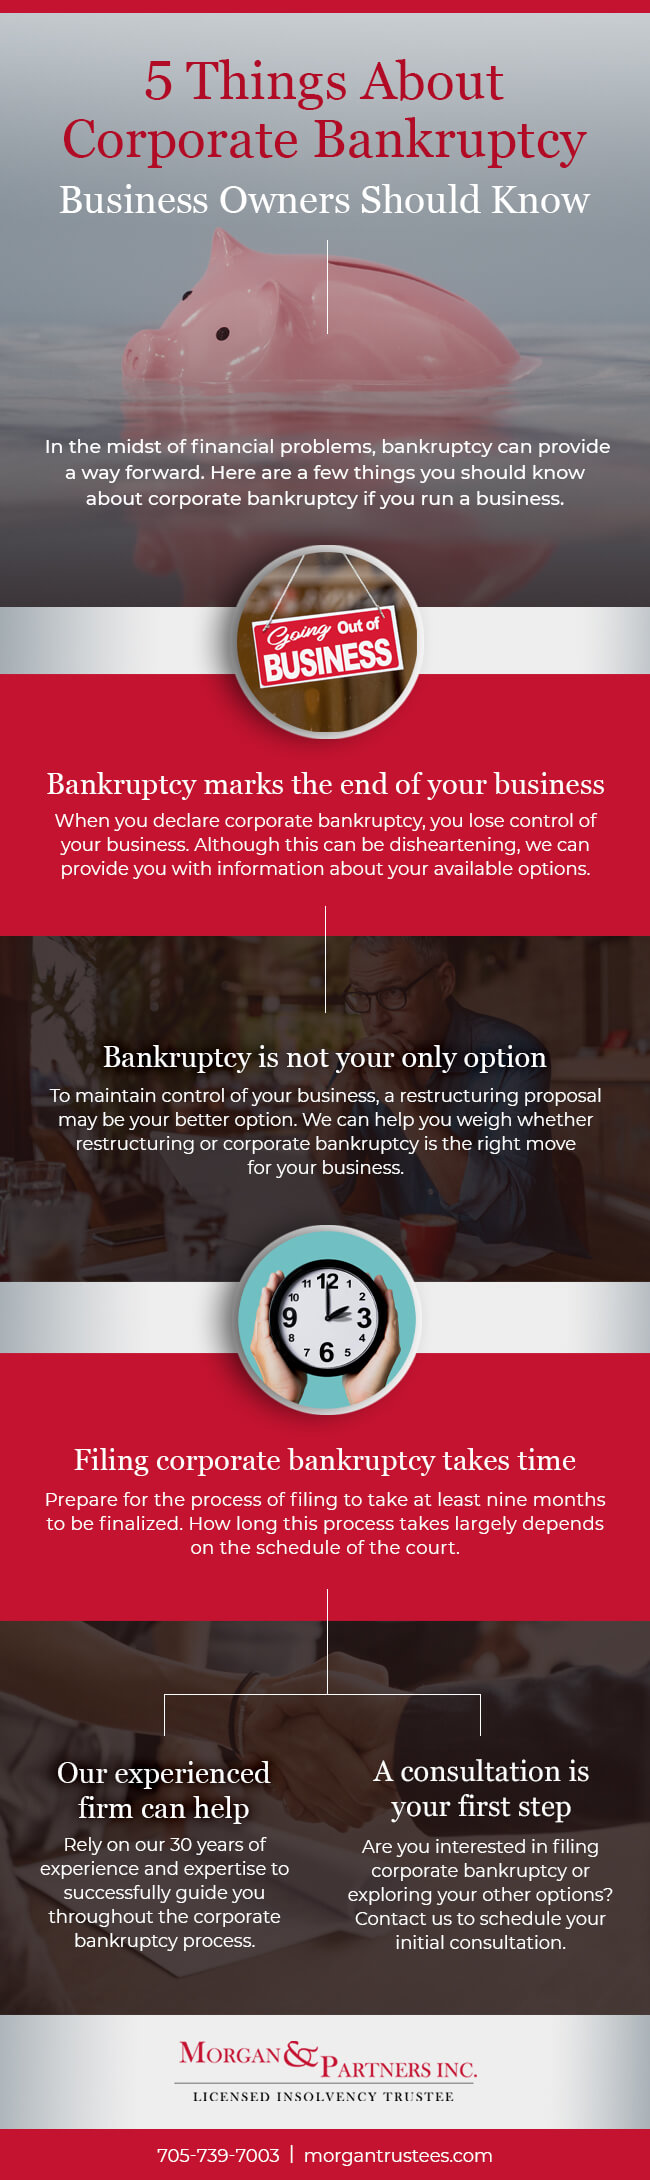 5 Things Business Owners Should Know About Corporate Bankruptcy